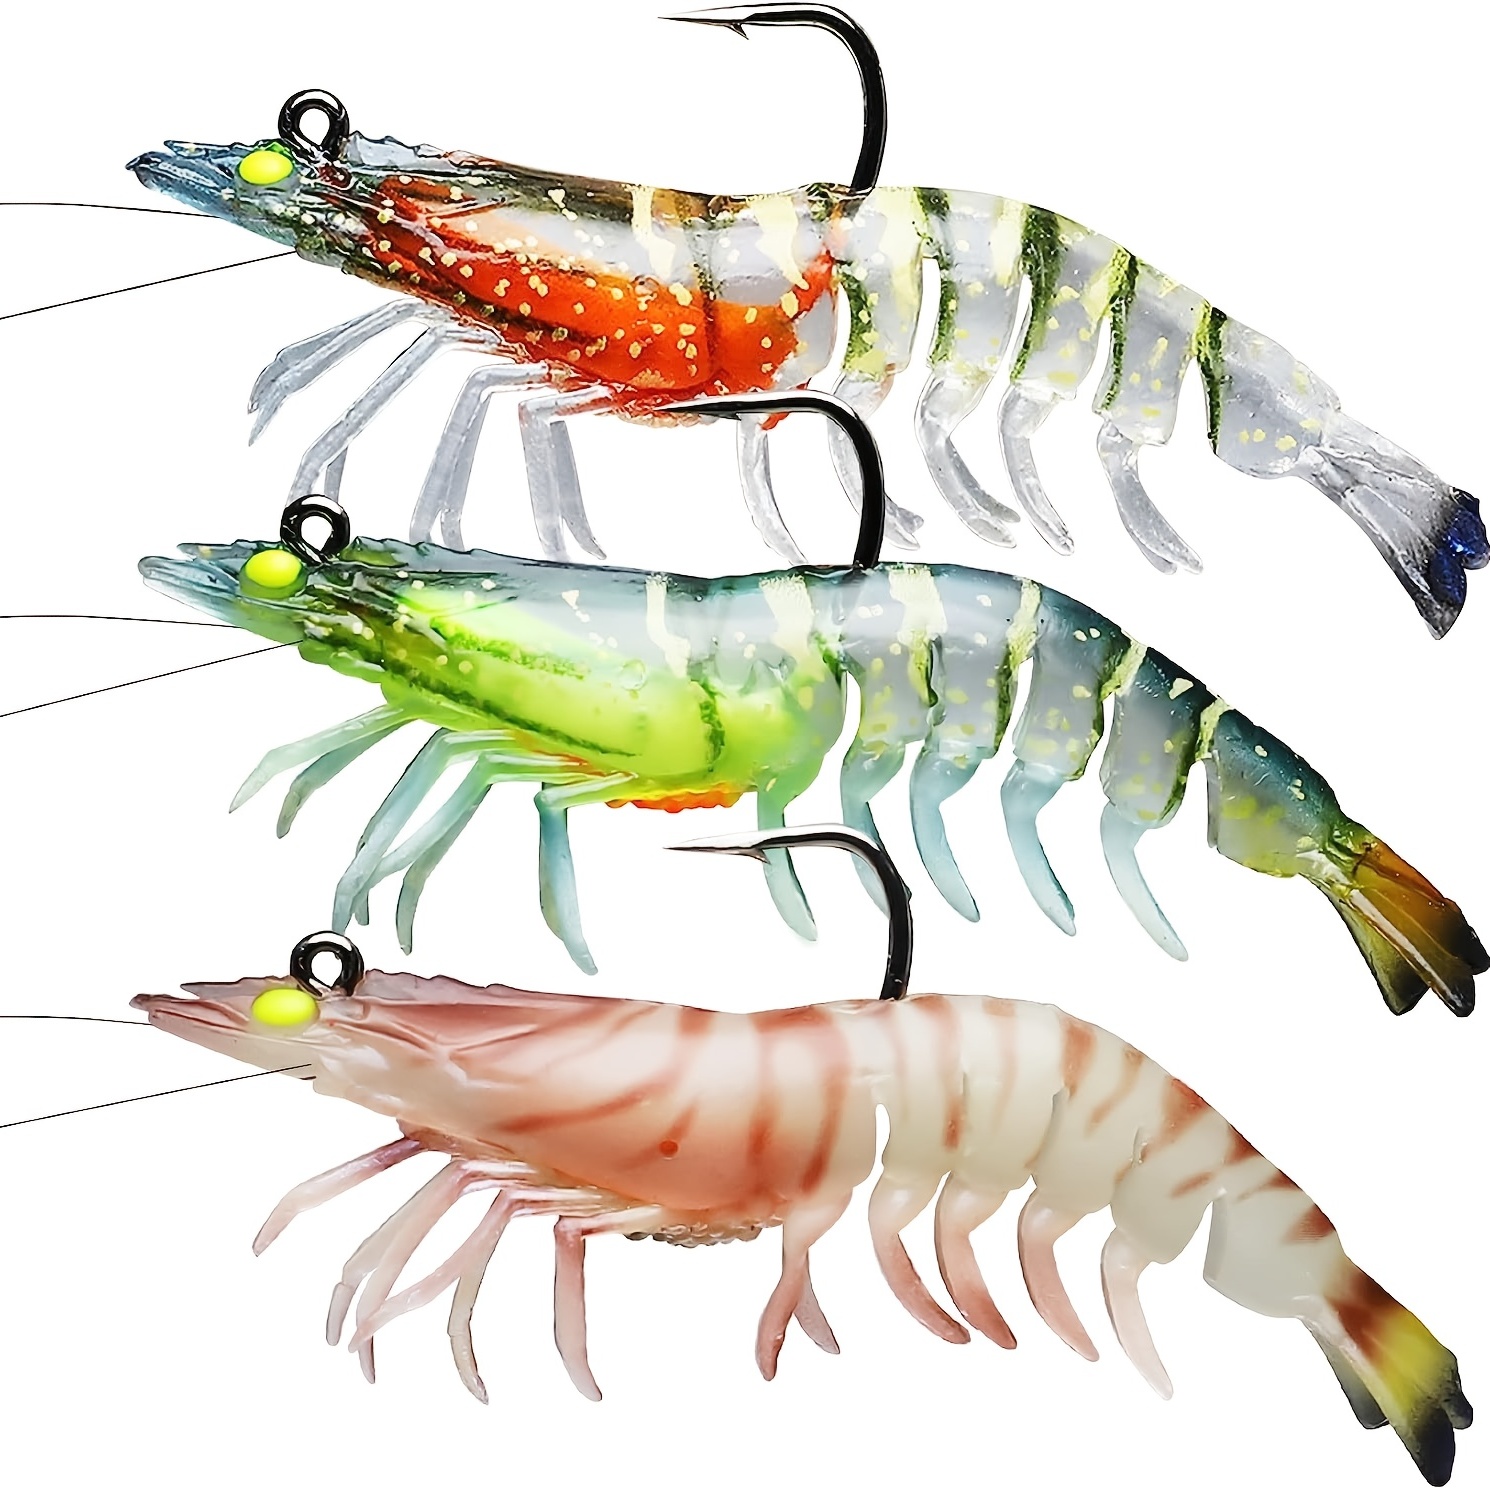 3pcs TPE Pre-Rigged Shrimp, Durable Soft Fishing Lures For Freshwater Or  Saltwater, Bass Fishing Jigs For Trout Crappie